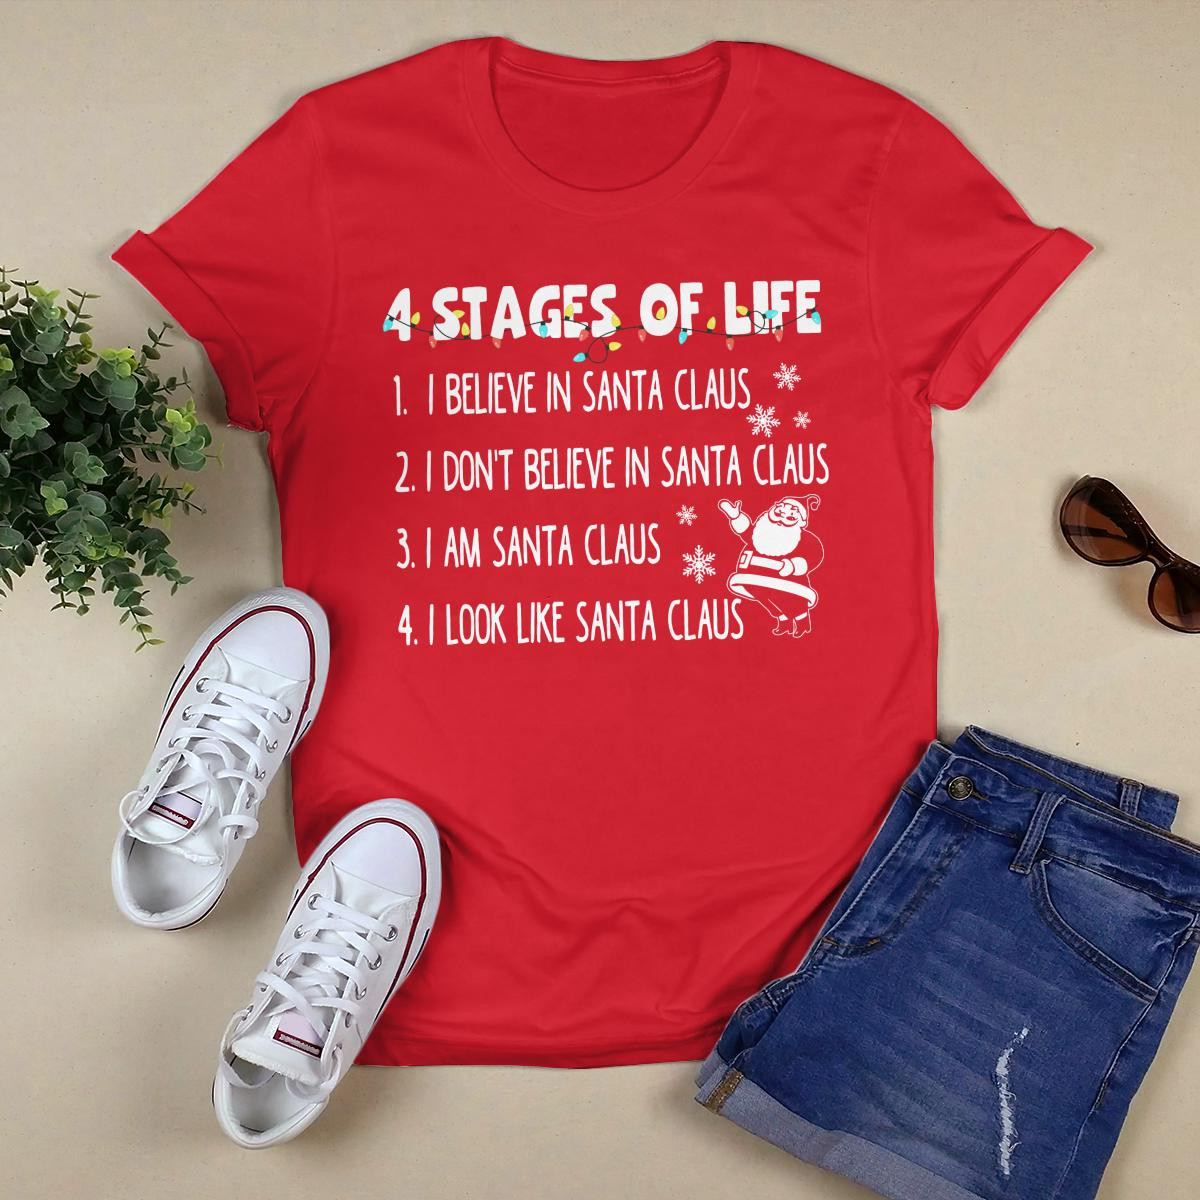 4 Stages Of Life shirt